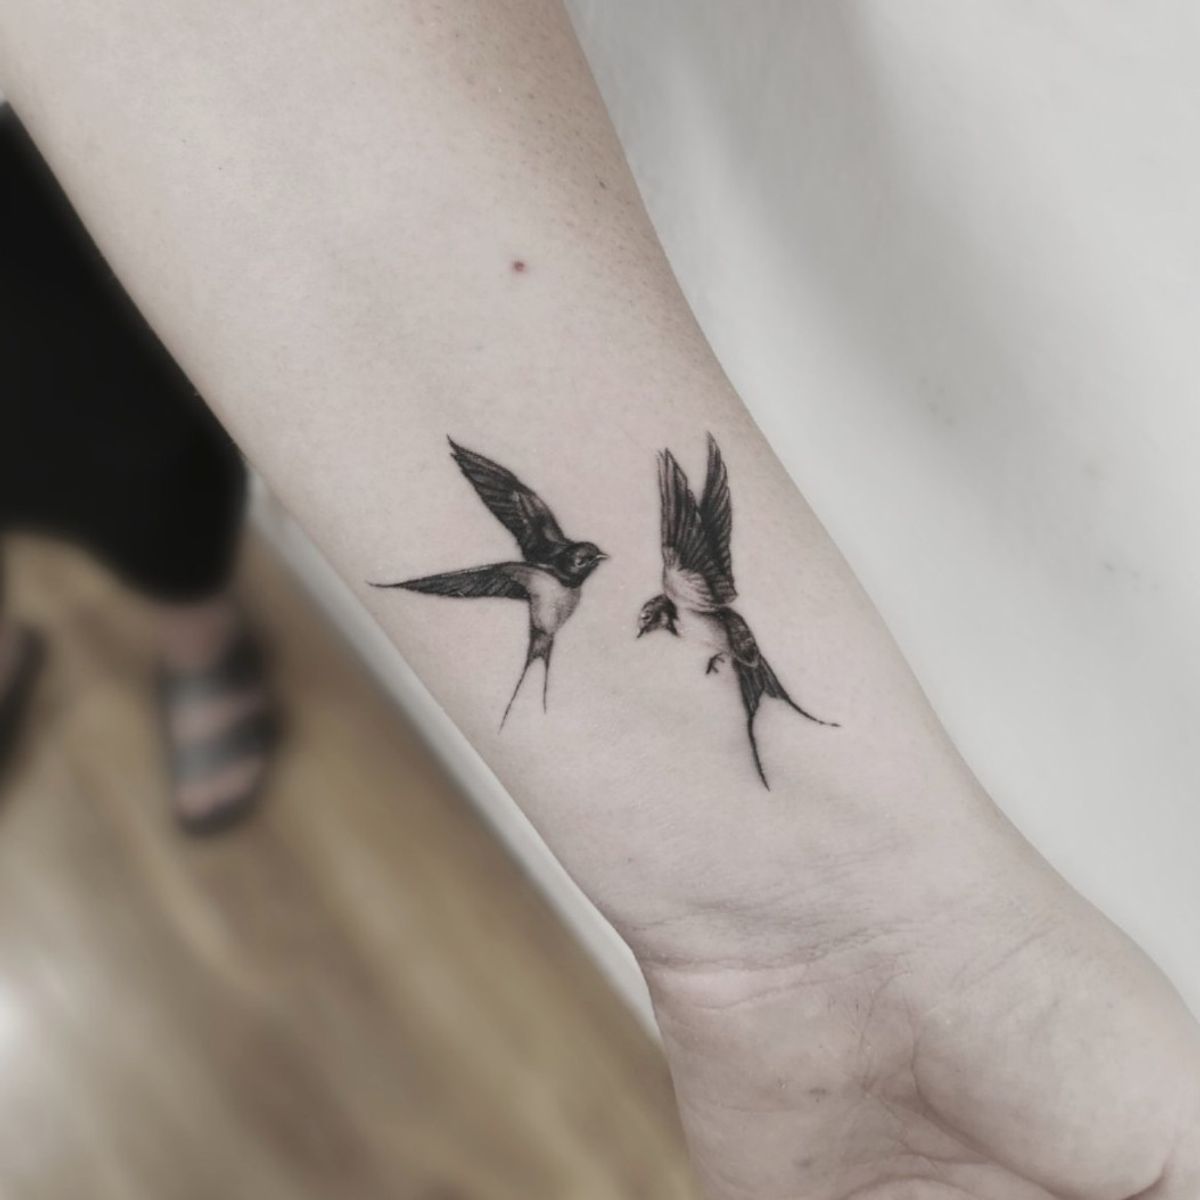 Tattoo uploaded by | D A I S Y • #swallow #swallows #swallowtattoo # ...